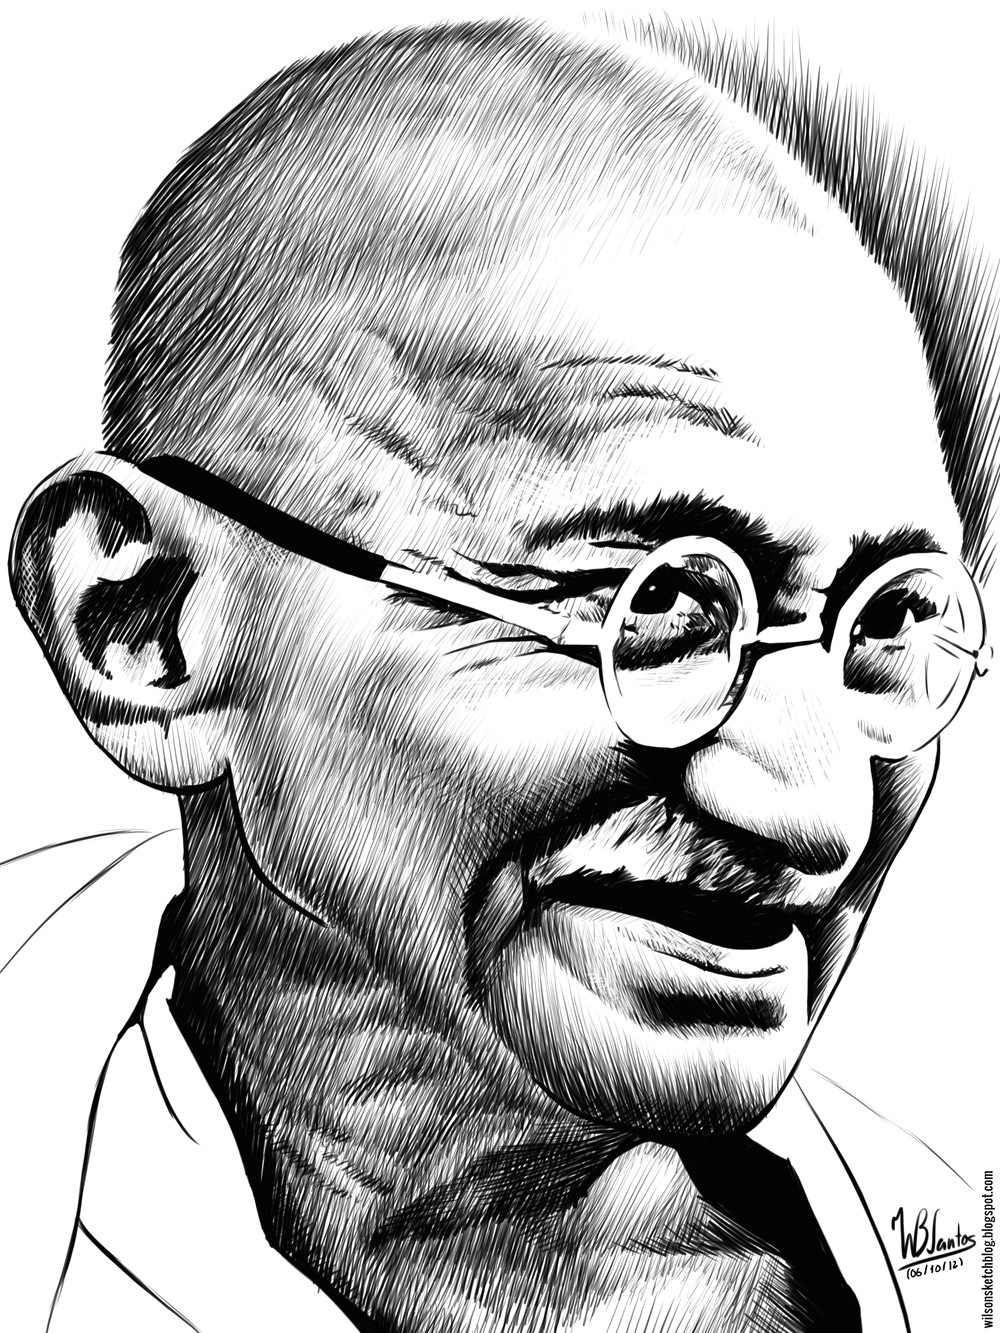 Easy Drawing Related to Independence Day Ink Drawing Of Mahatma Gandhi Portraits I Admire In 2019